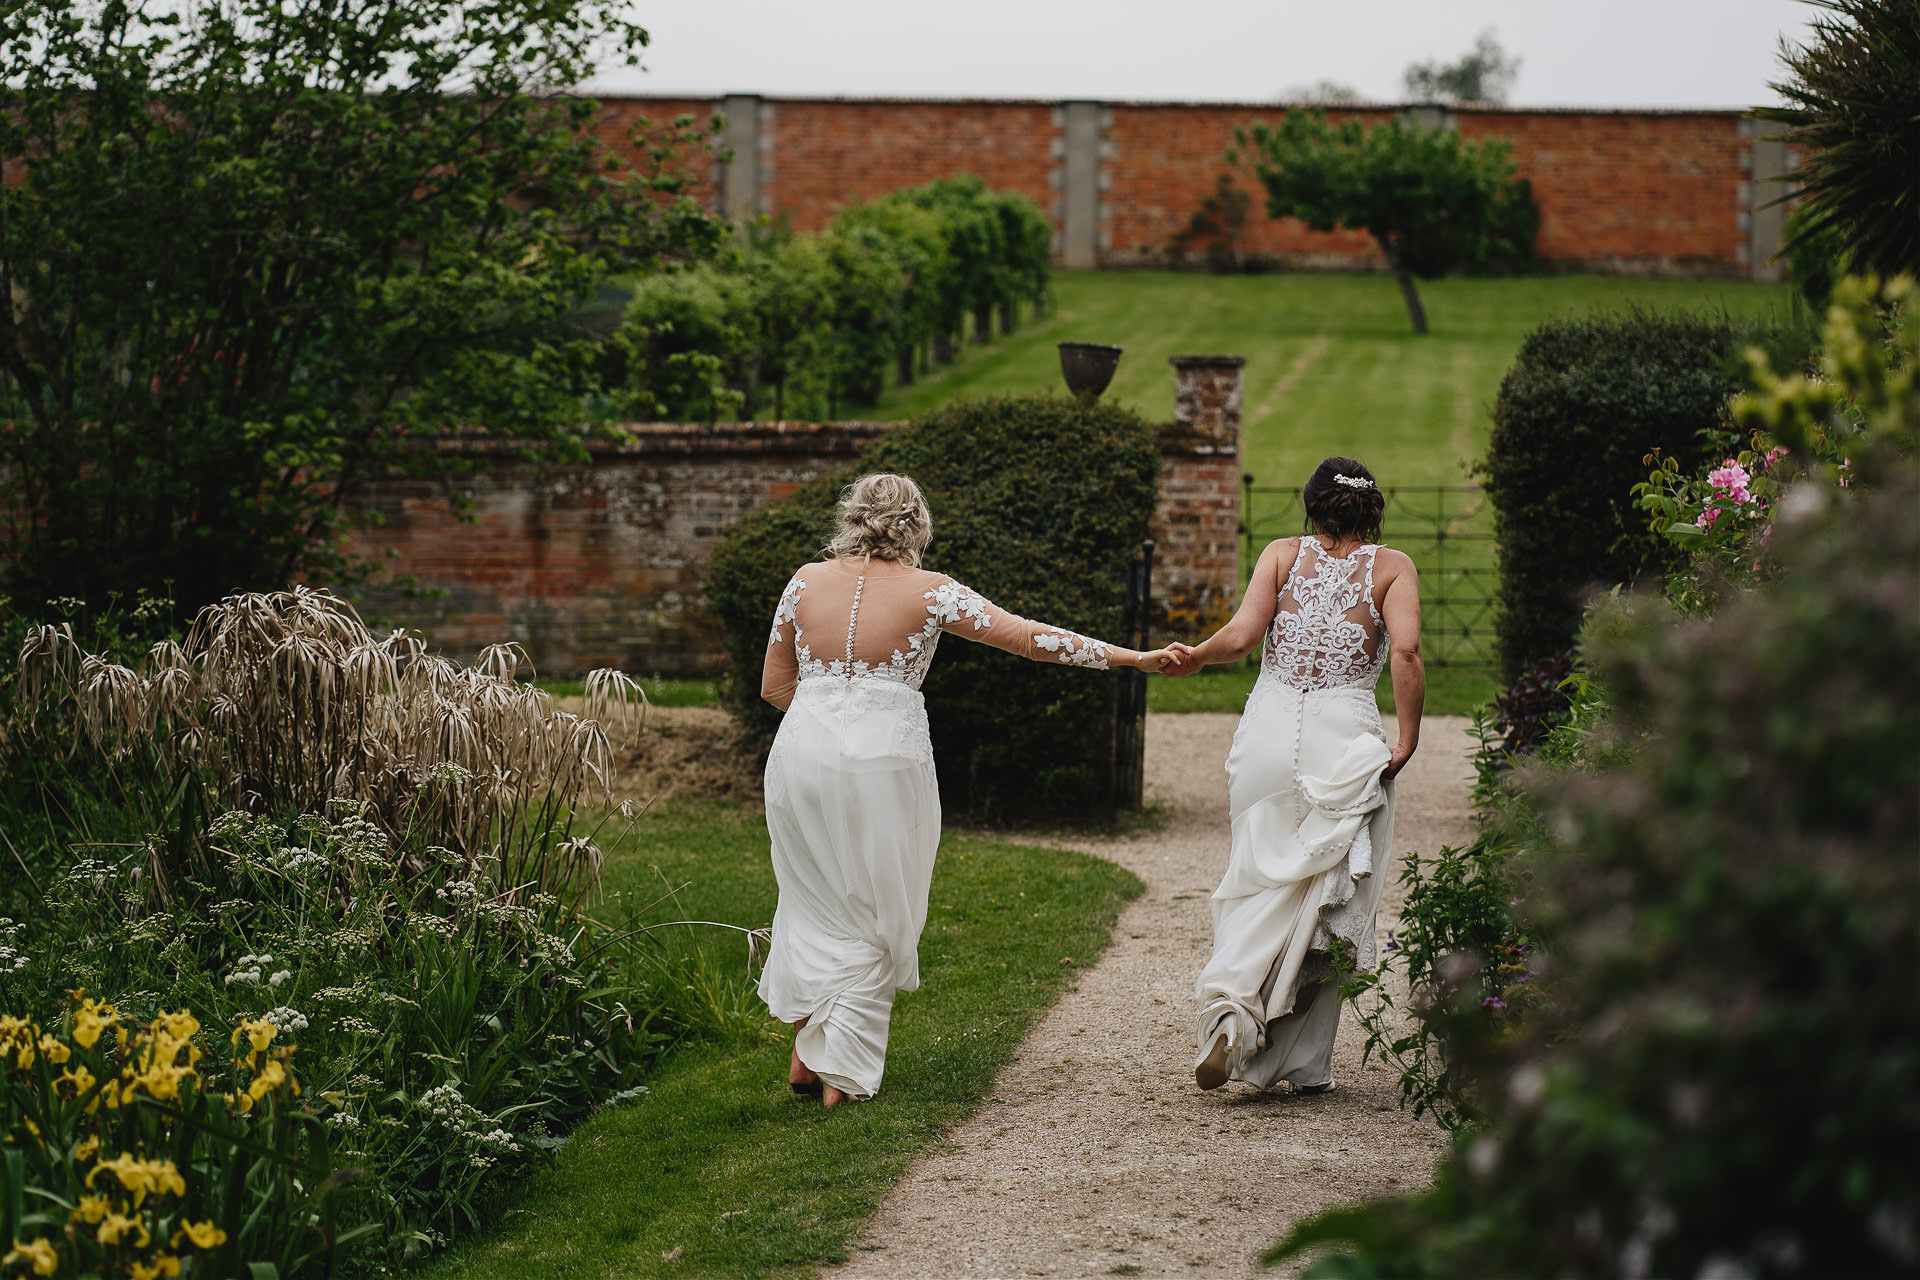 Bride and bride walking hand in hand at their Cadhay wedding